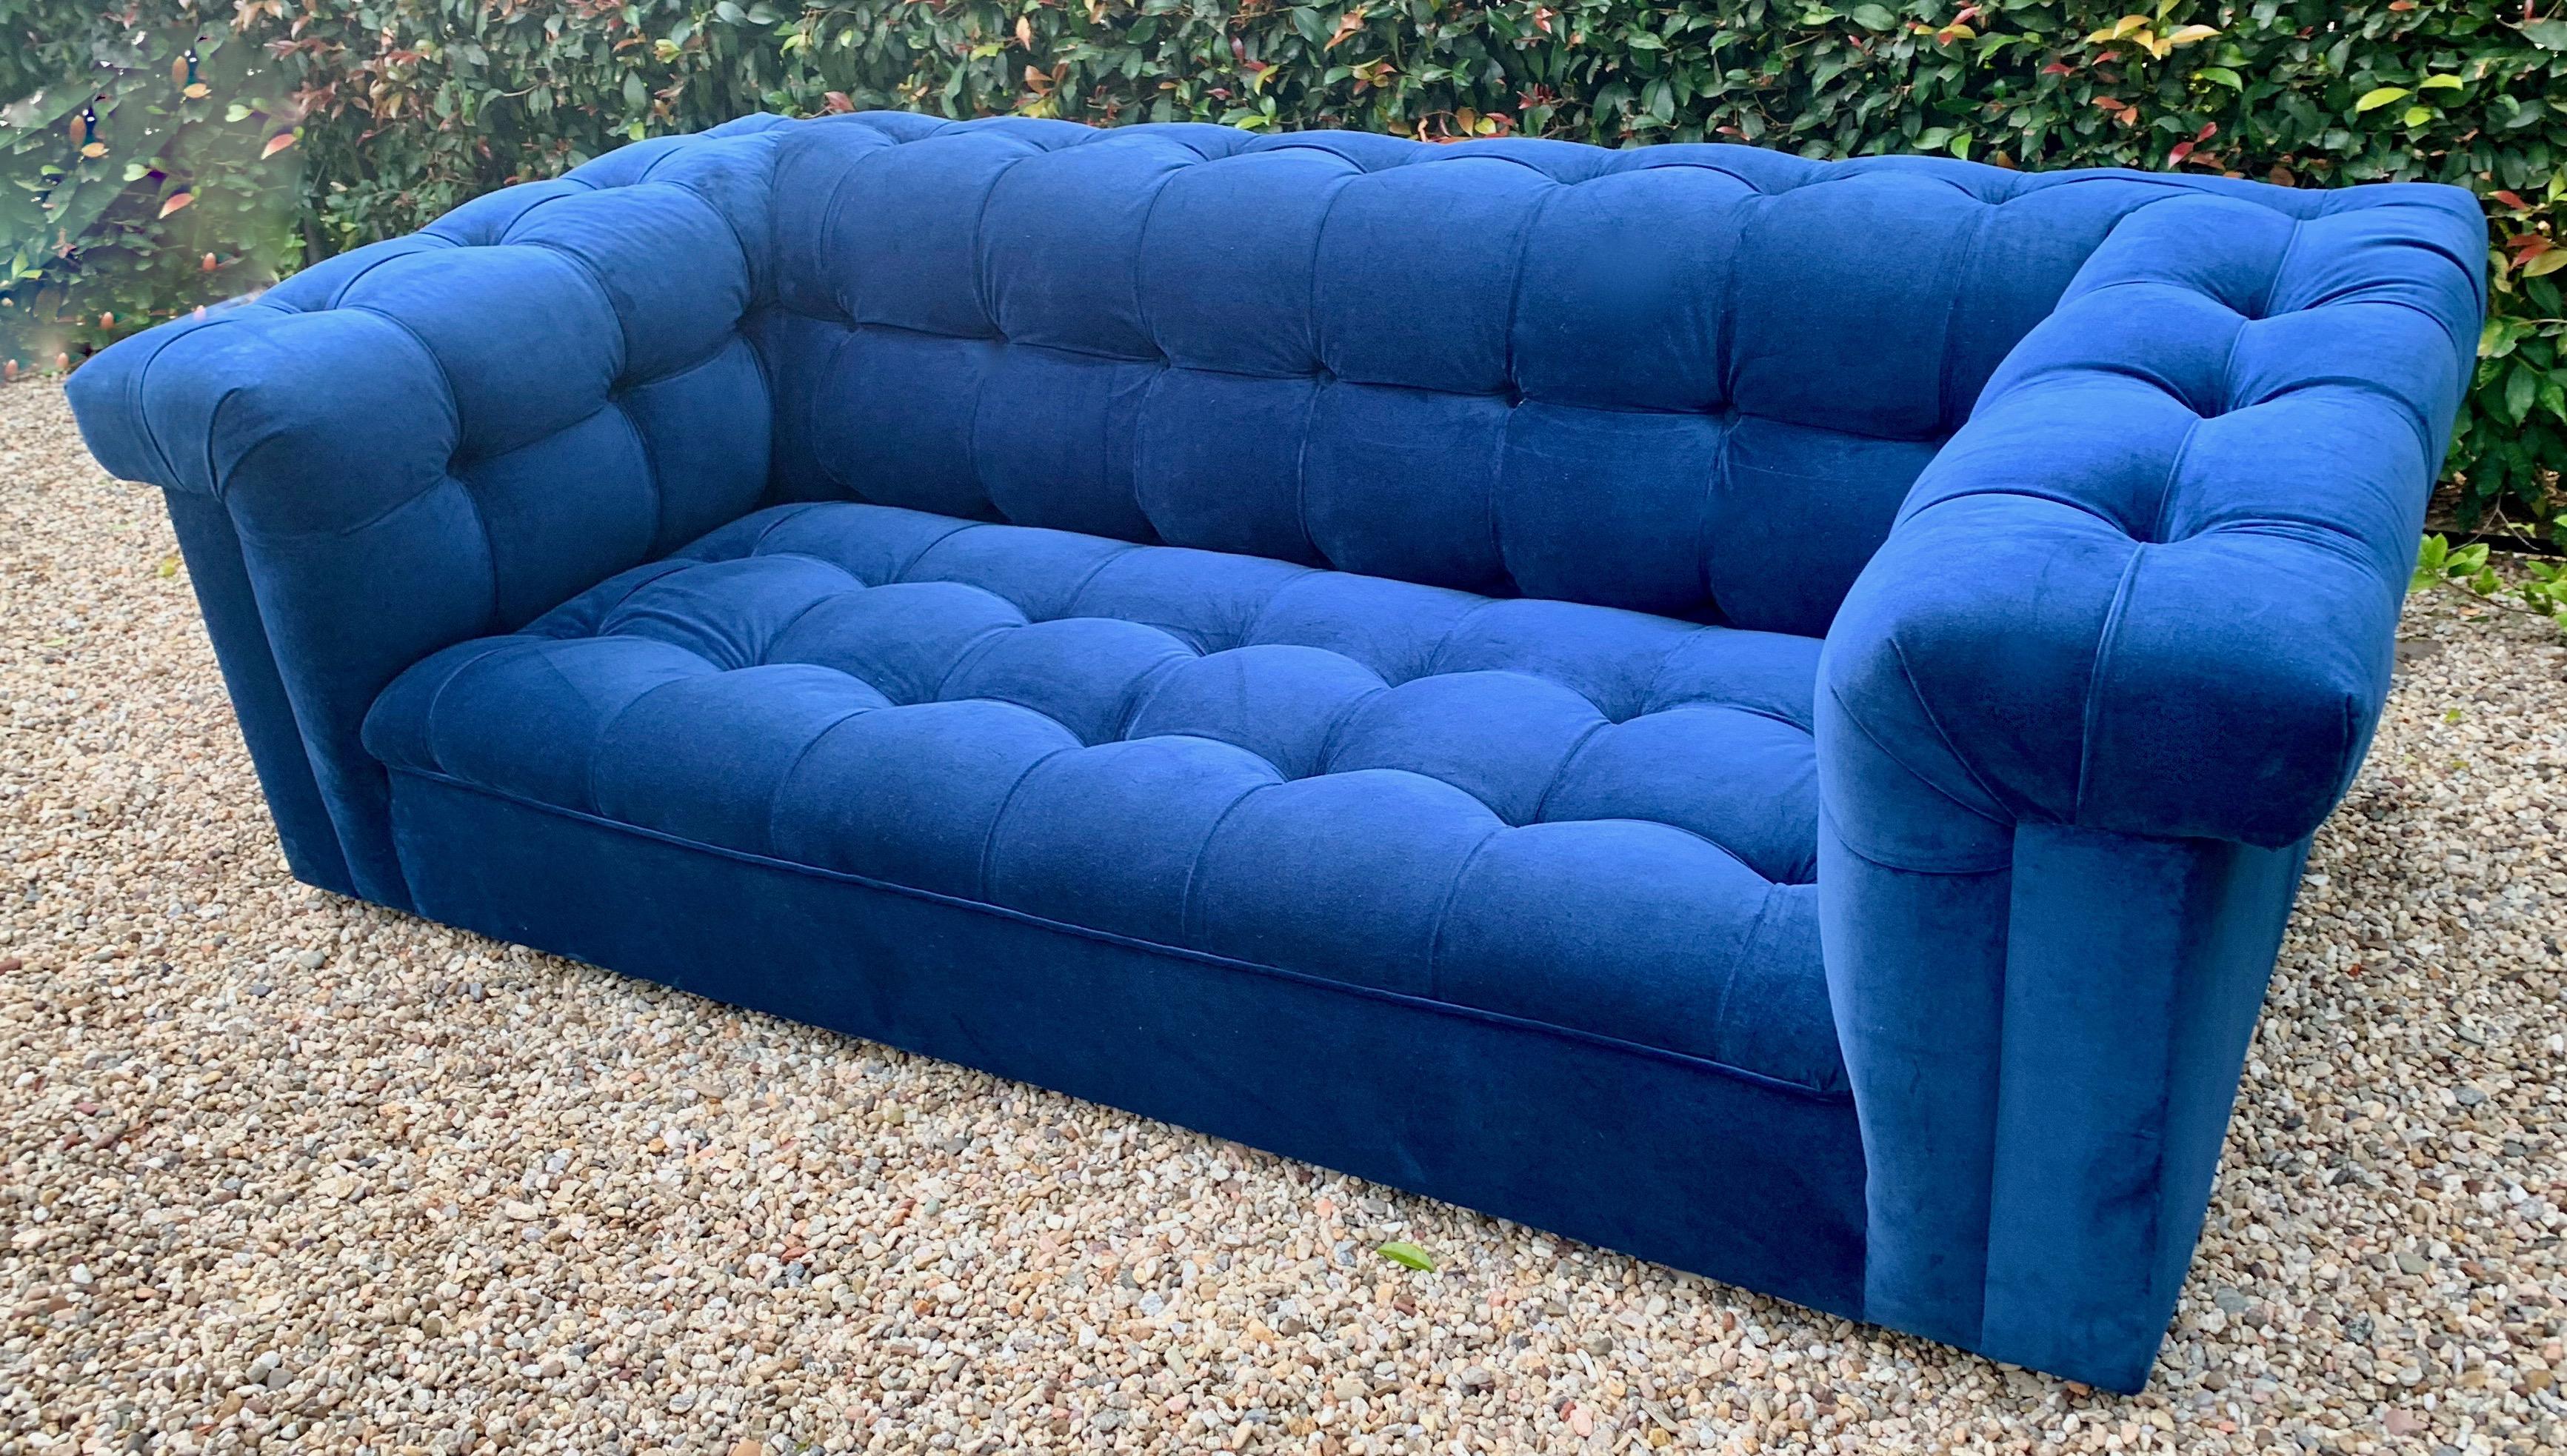 Iconic Dunbar party sofa in cerulean tufted blue velvet, designed by Edward Wormley. Large enough for a wonderful statement. However, the perfect size for bedroom, smaller reading room, or the formal living space.